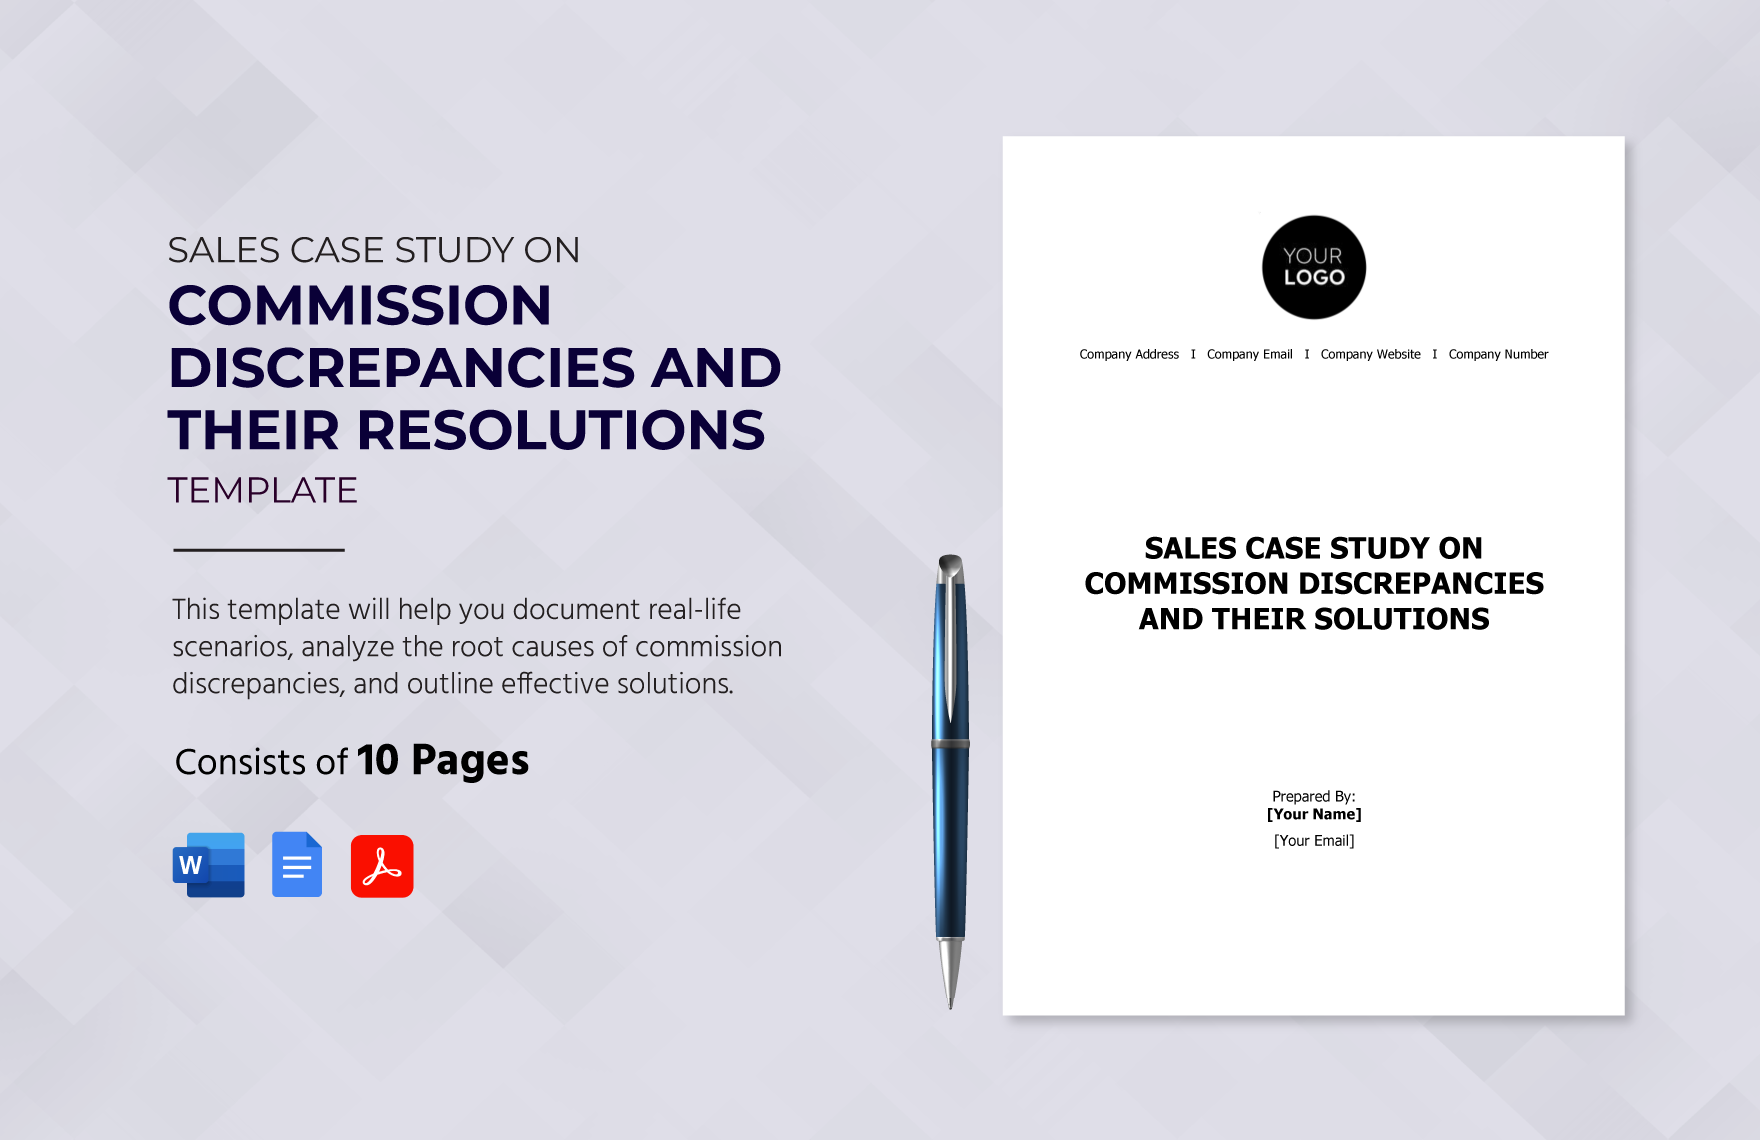 Sales Case Study on Commission Discrepancies and Their Resolutions Template